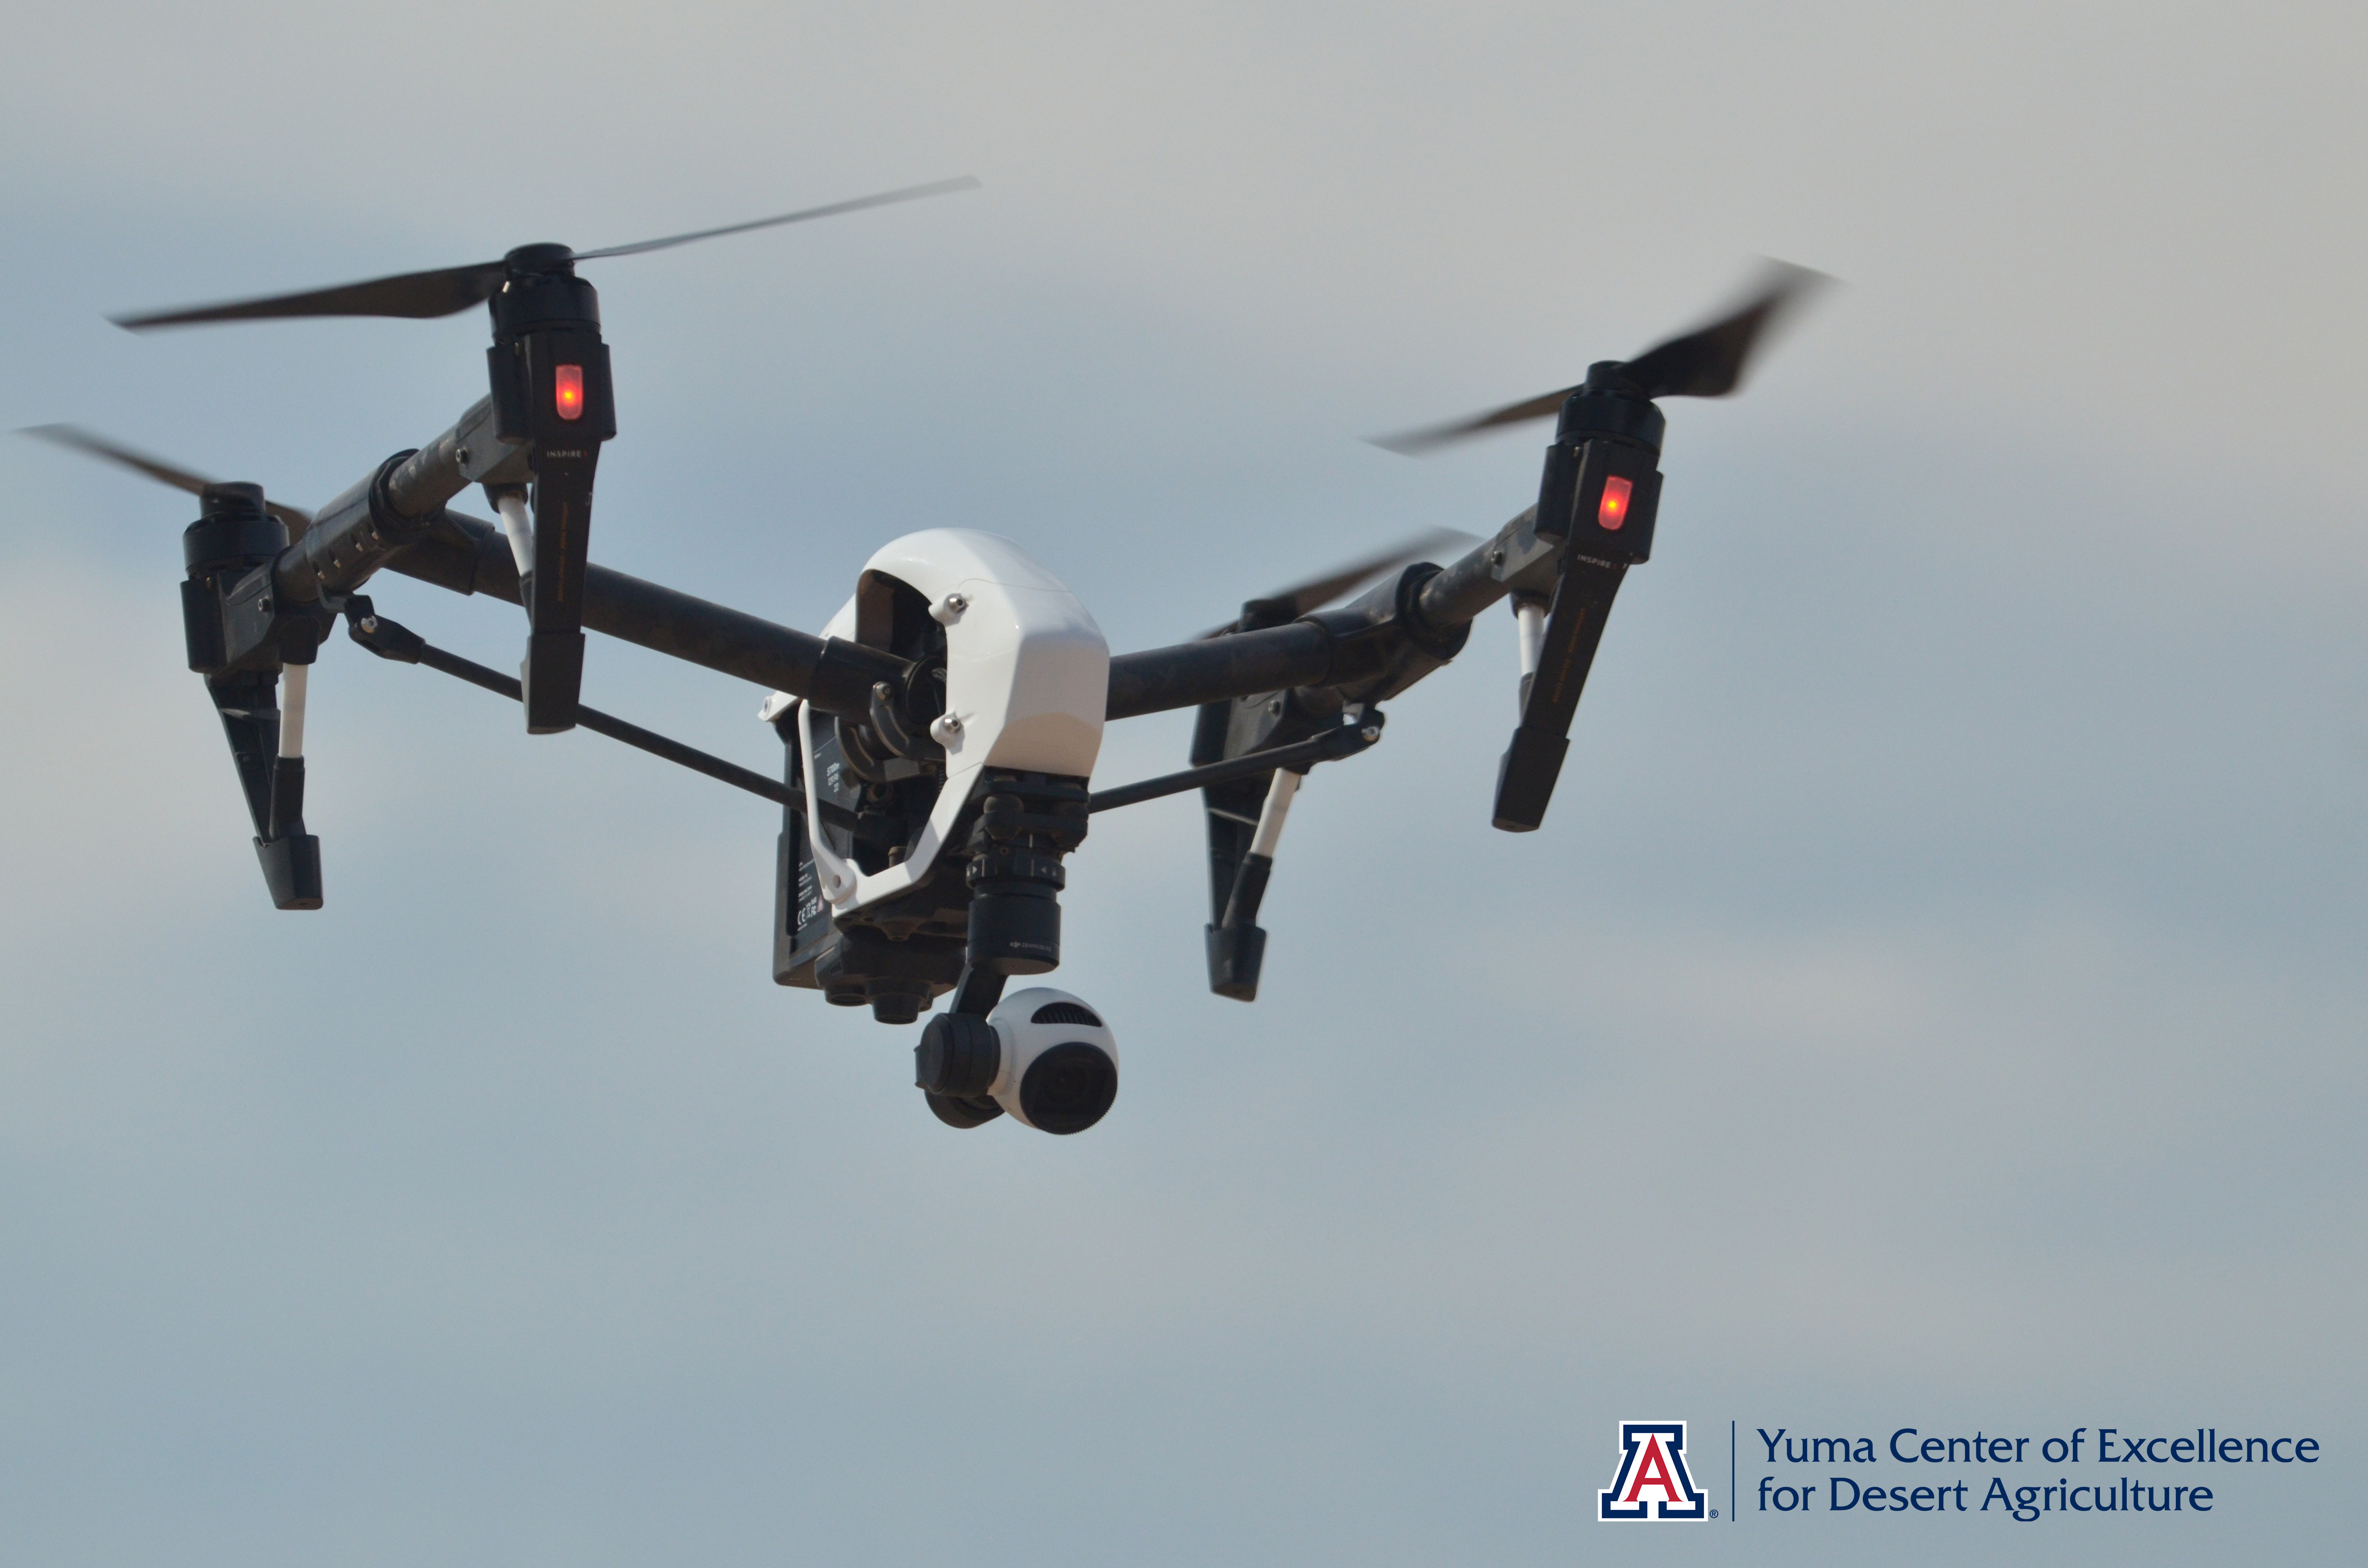 Yuma Center of Excellence for Drone Agriculture, drone in flight